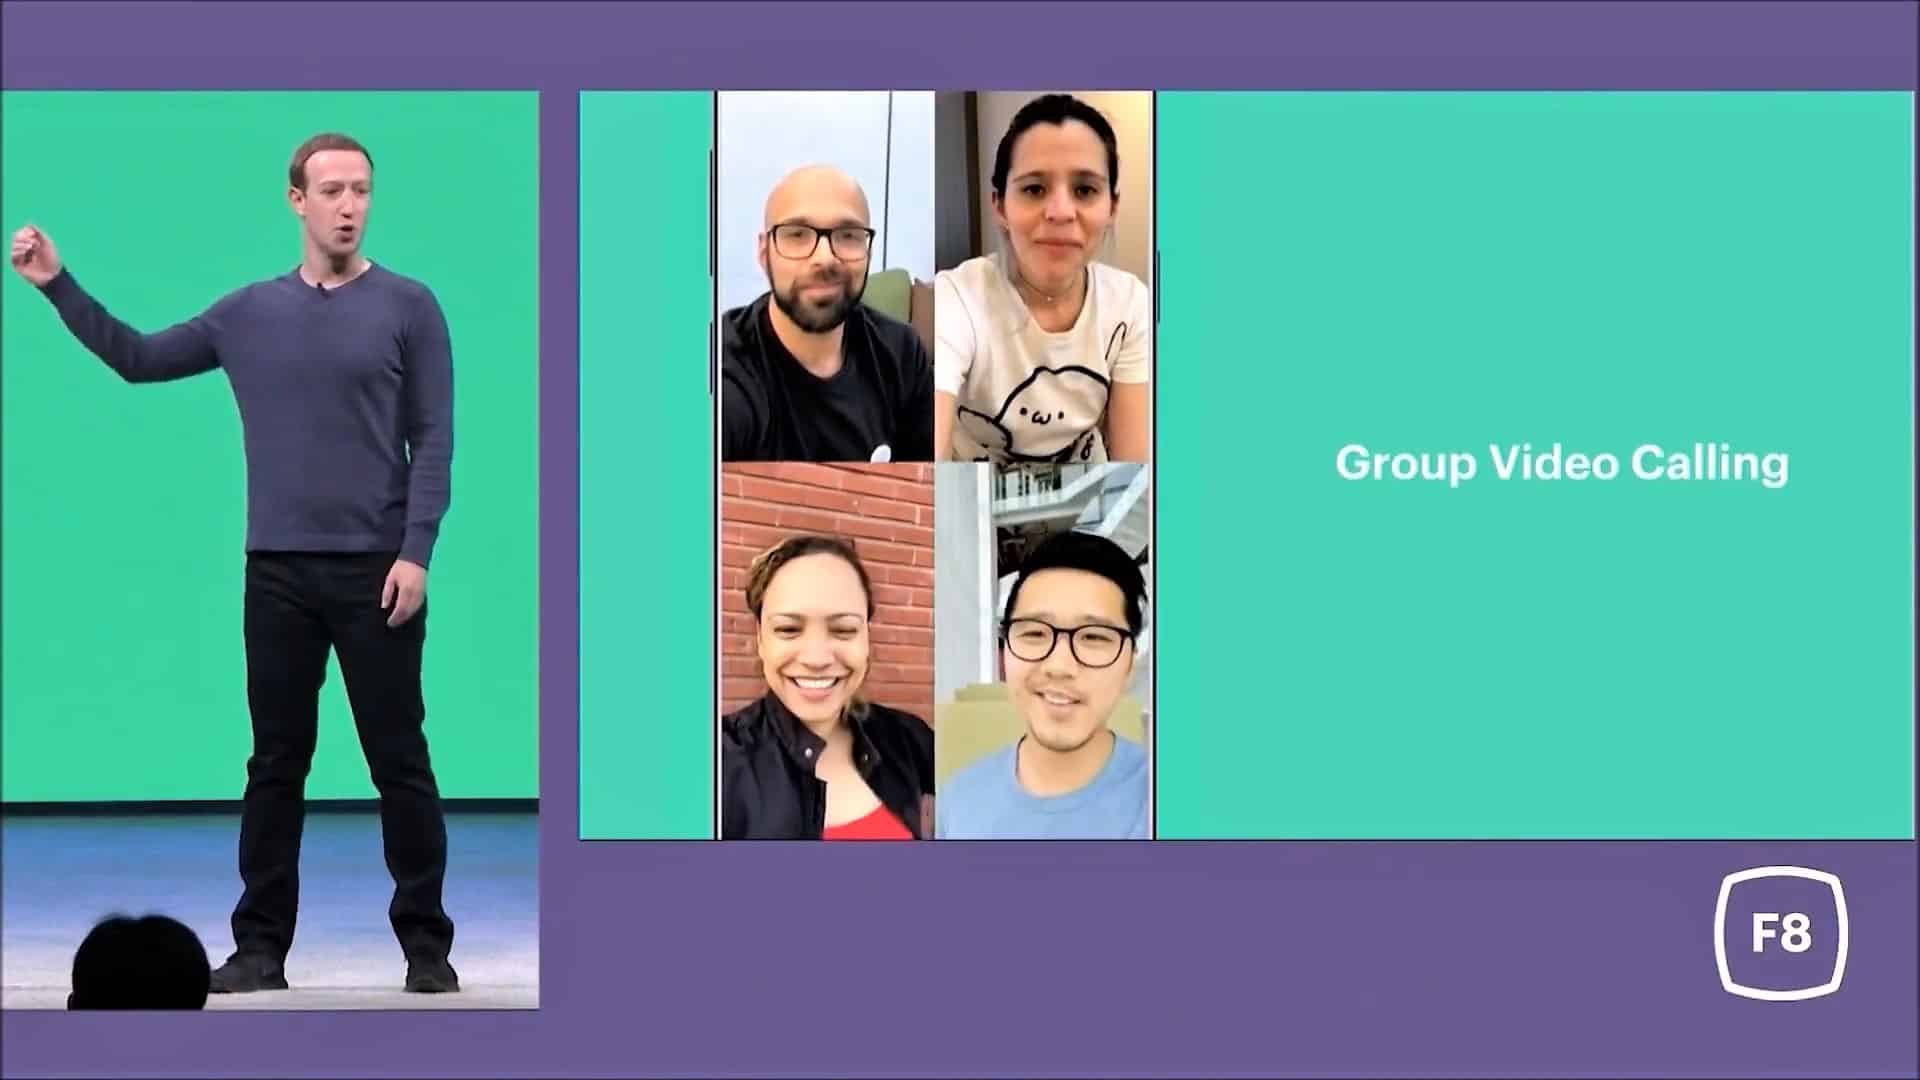 Group Video Calling